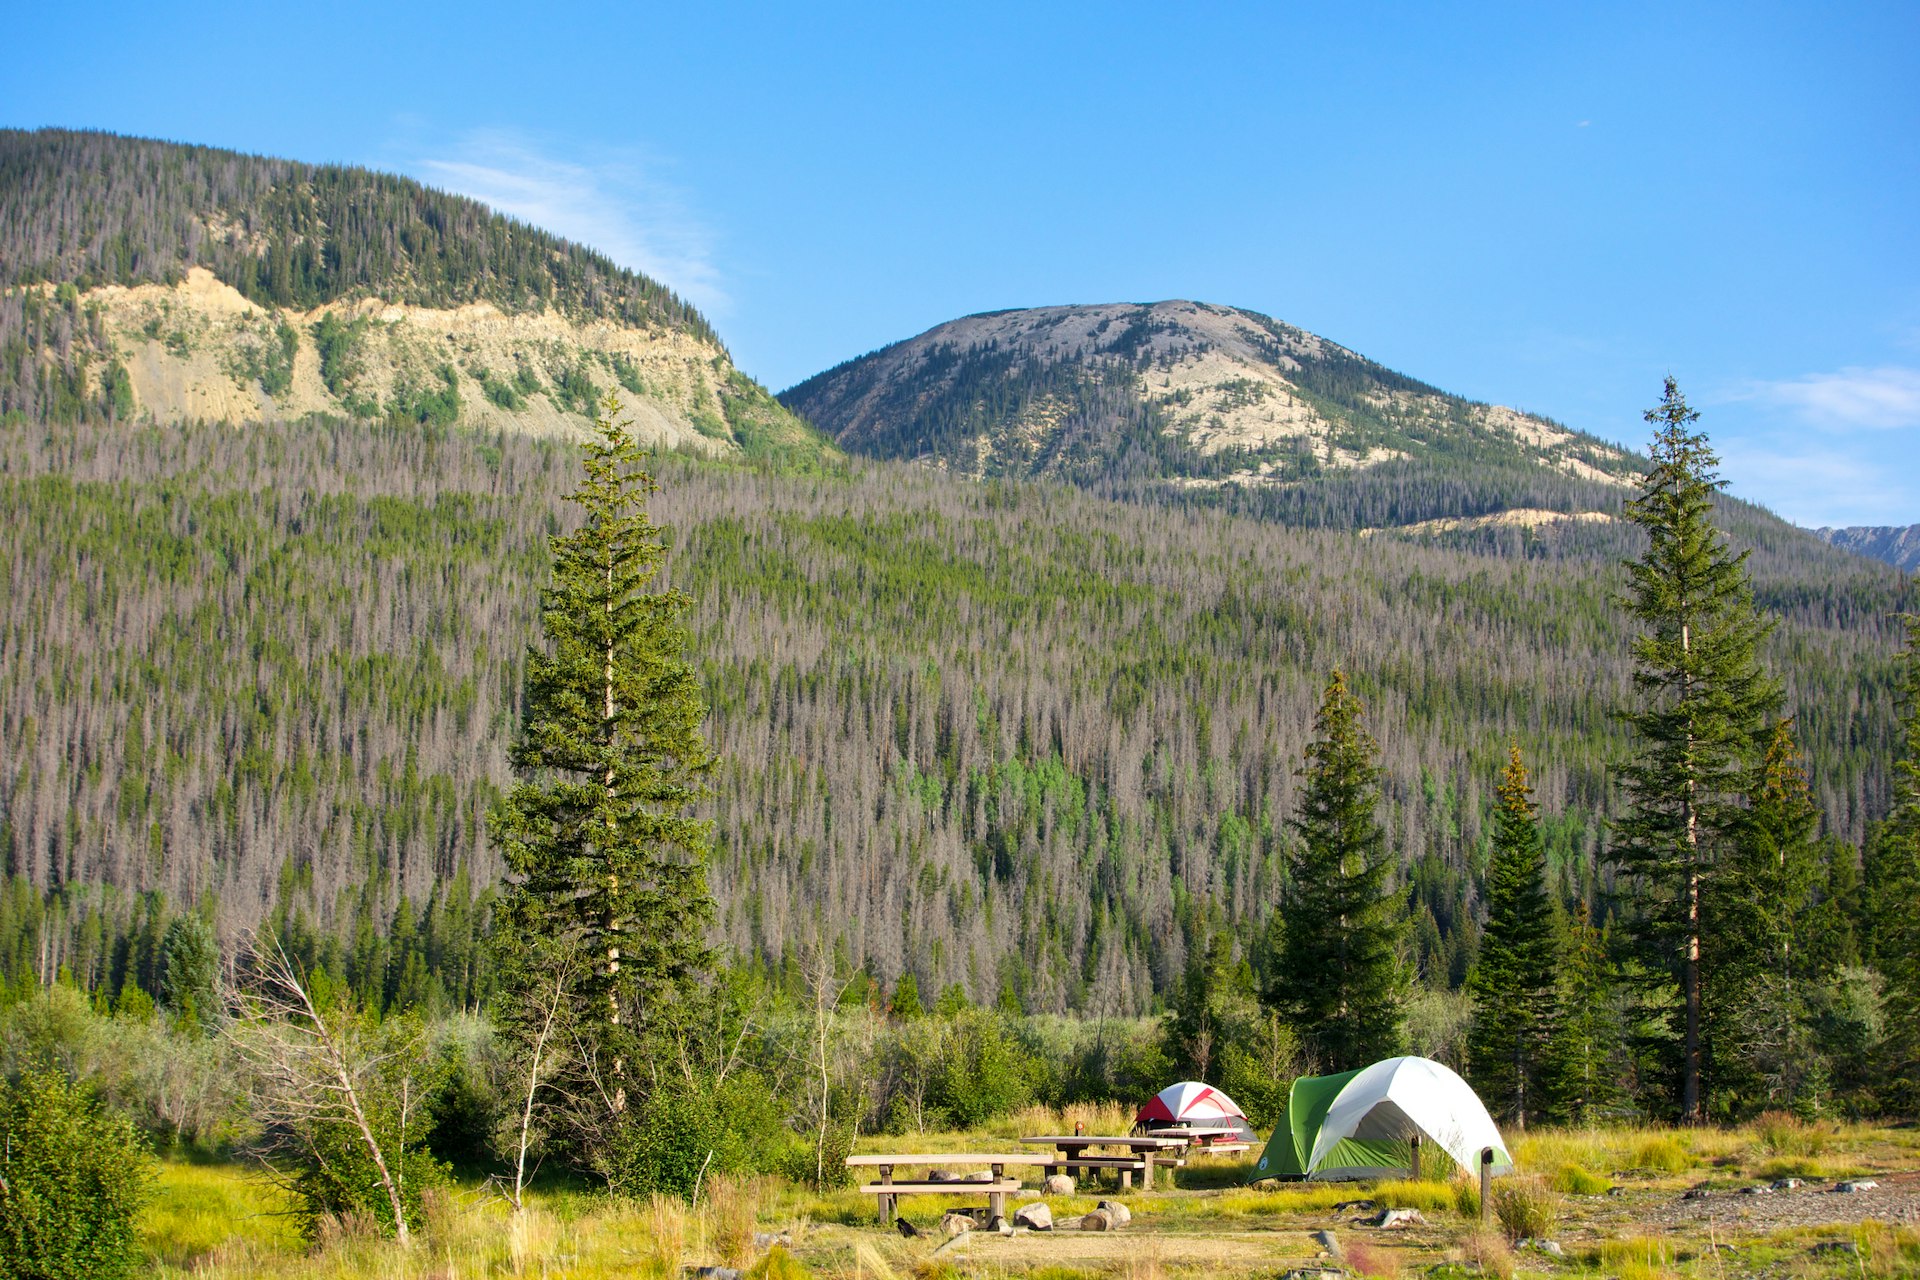 Tent at a campground in Colorado backed by mountain ridges